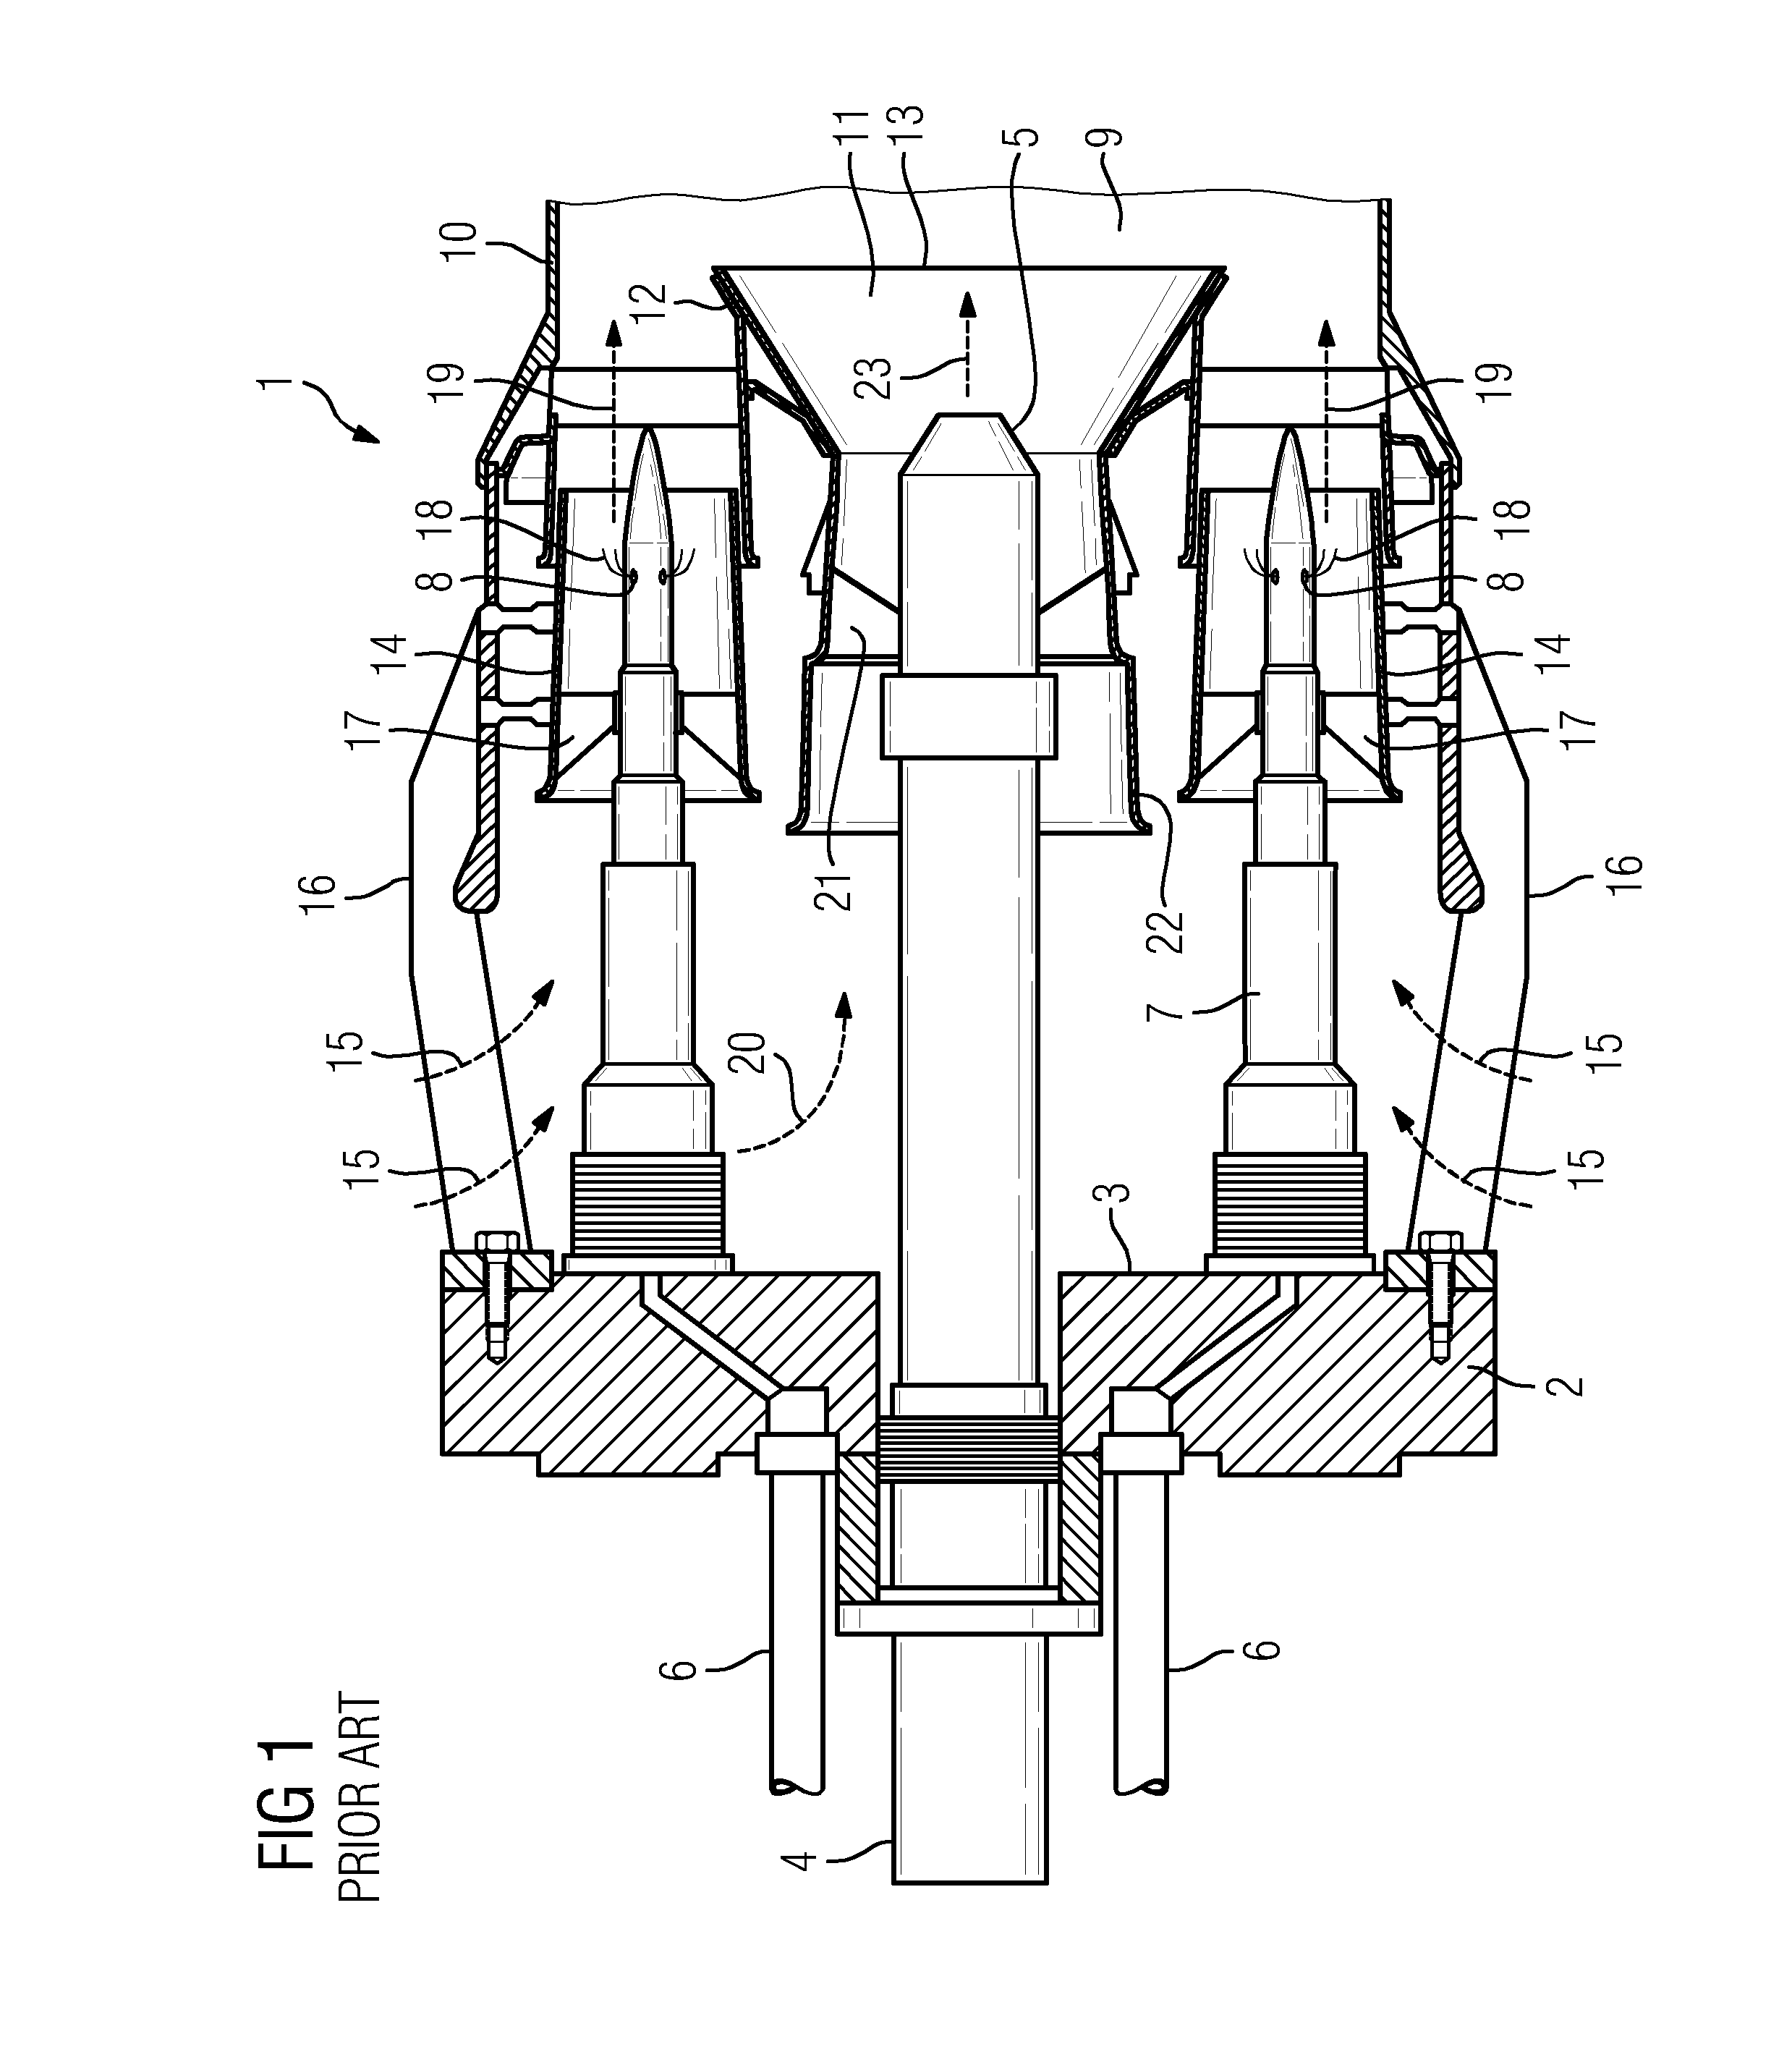 Fuel injector and swirler assembly with lobed mixer